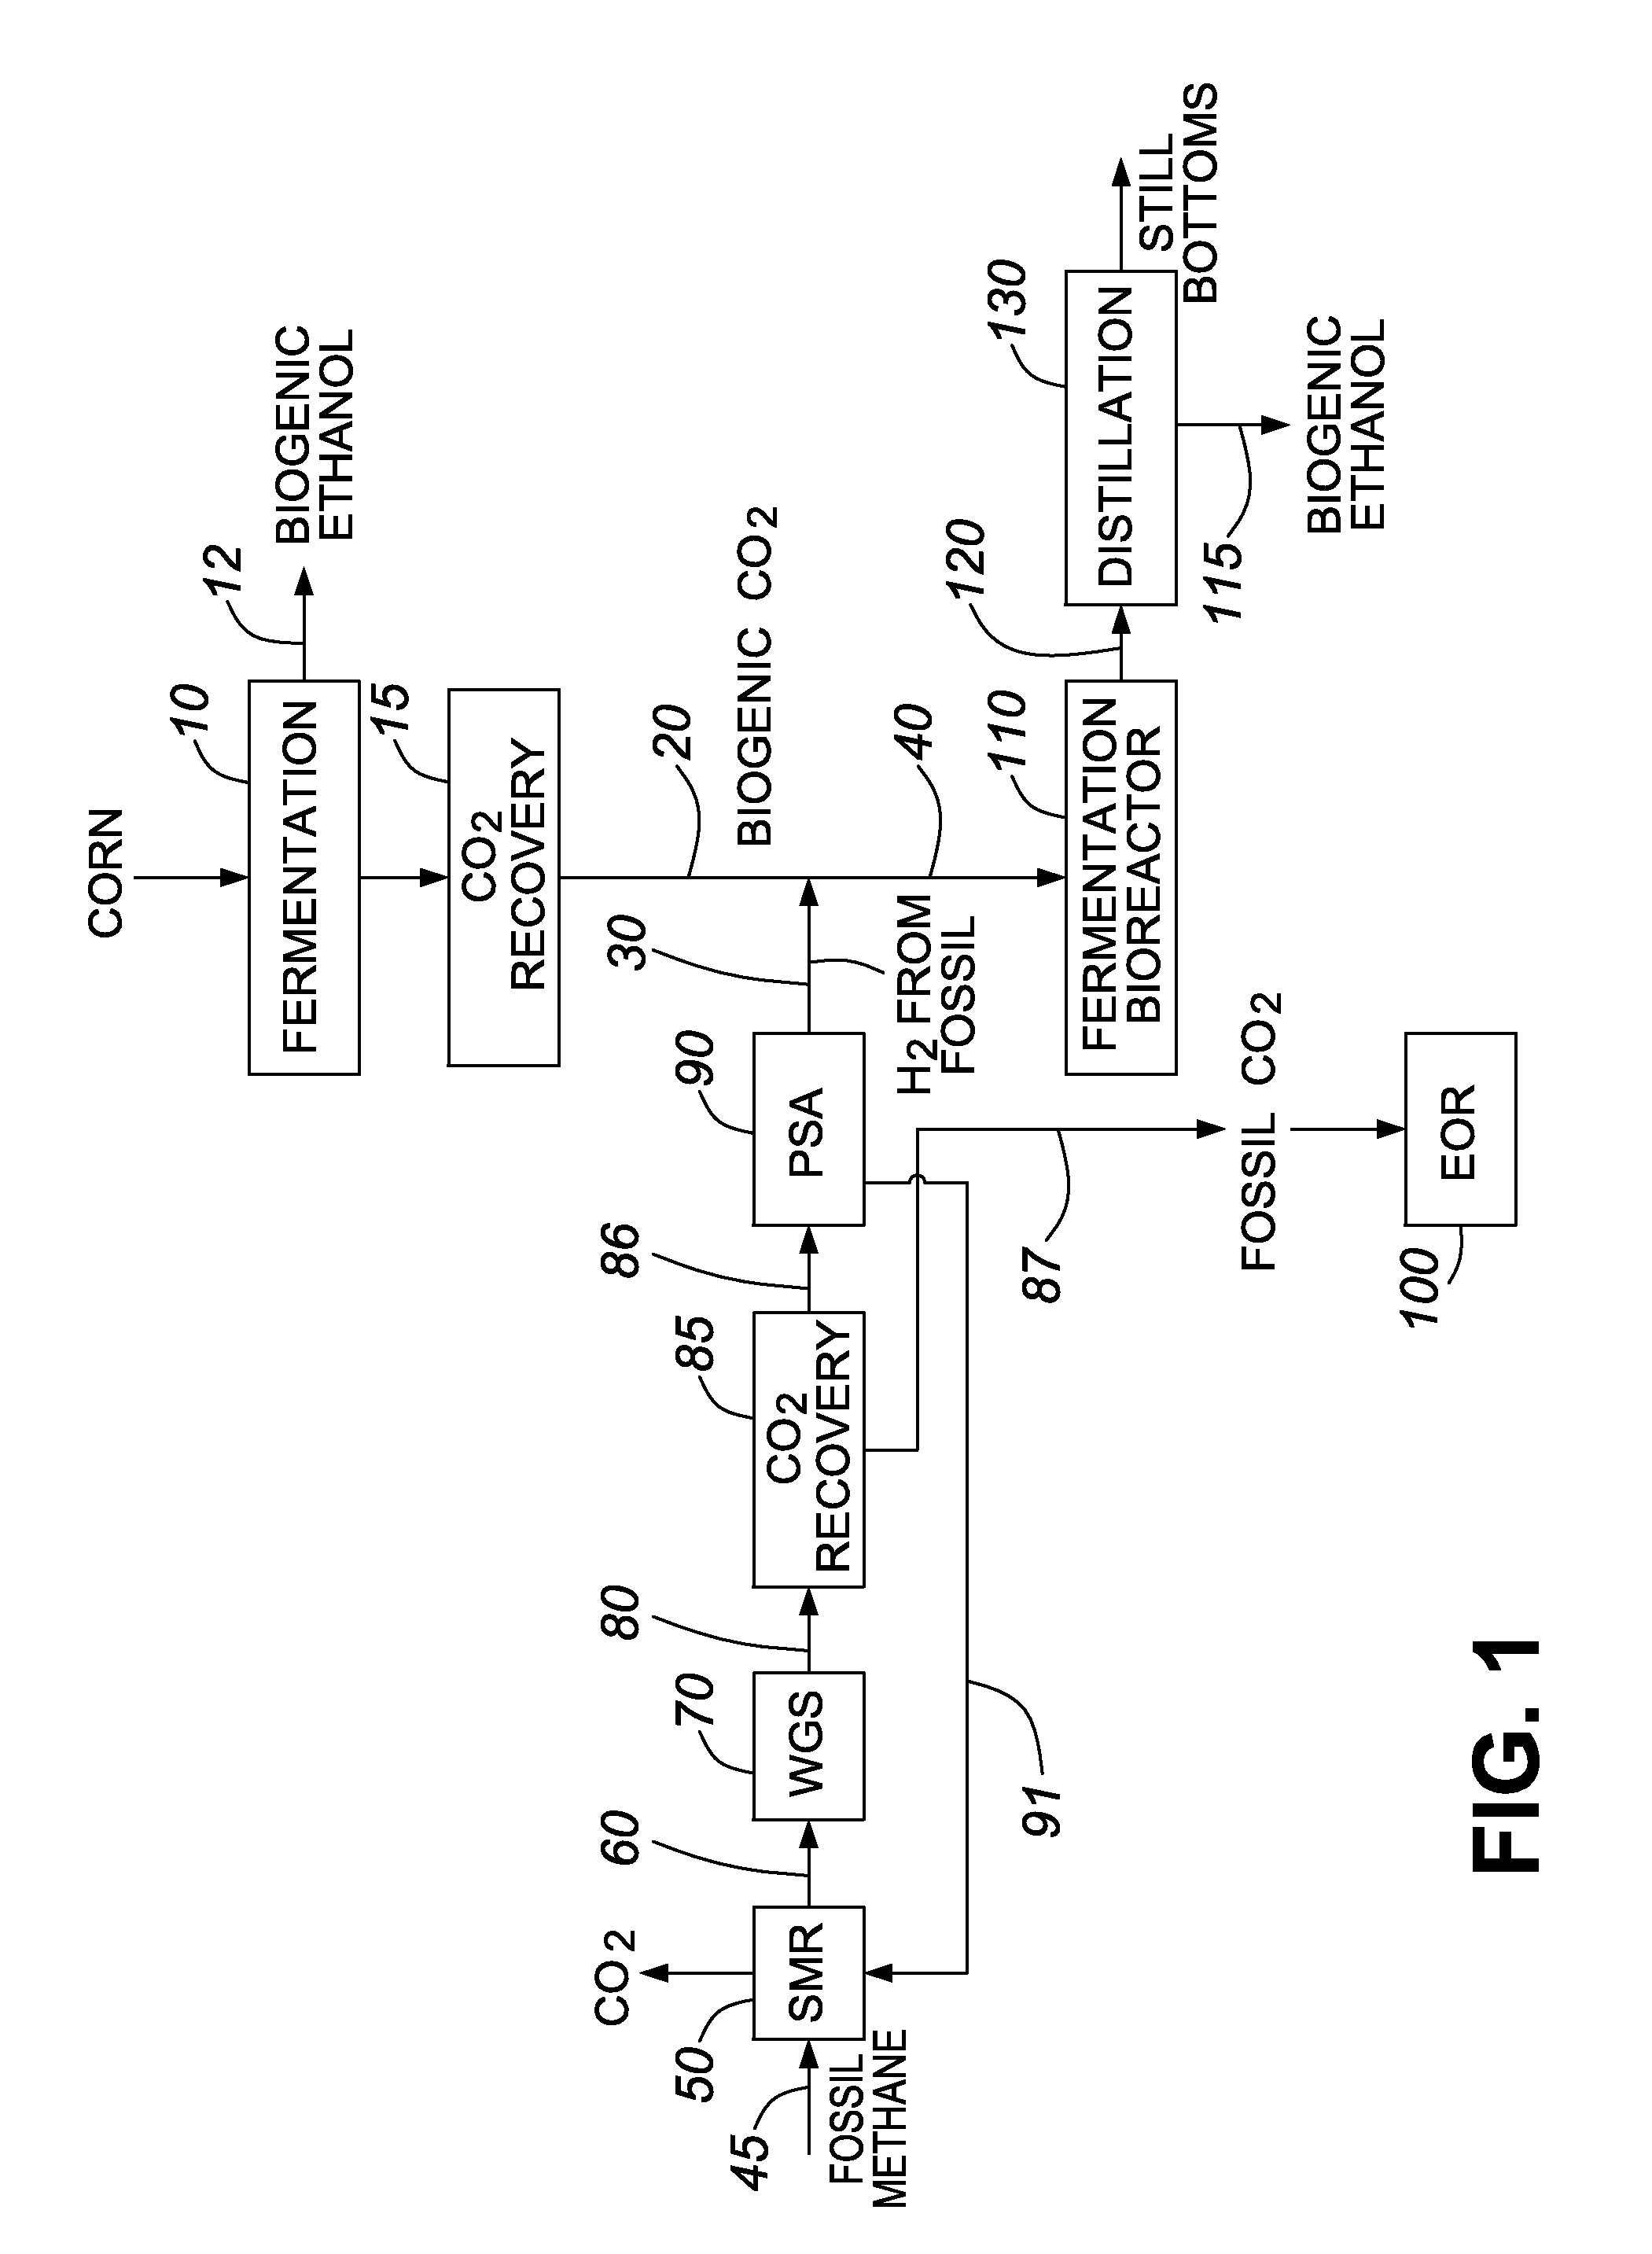 Process for using biogenic carbon dioxide derived from non-fossil organic material